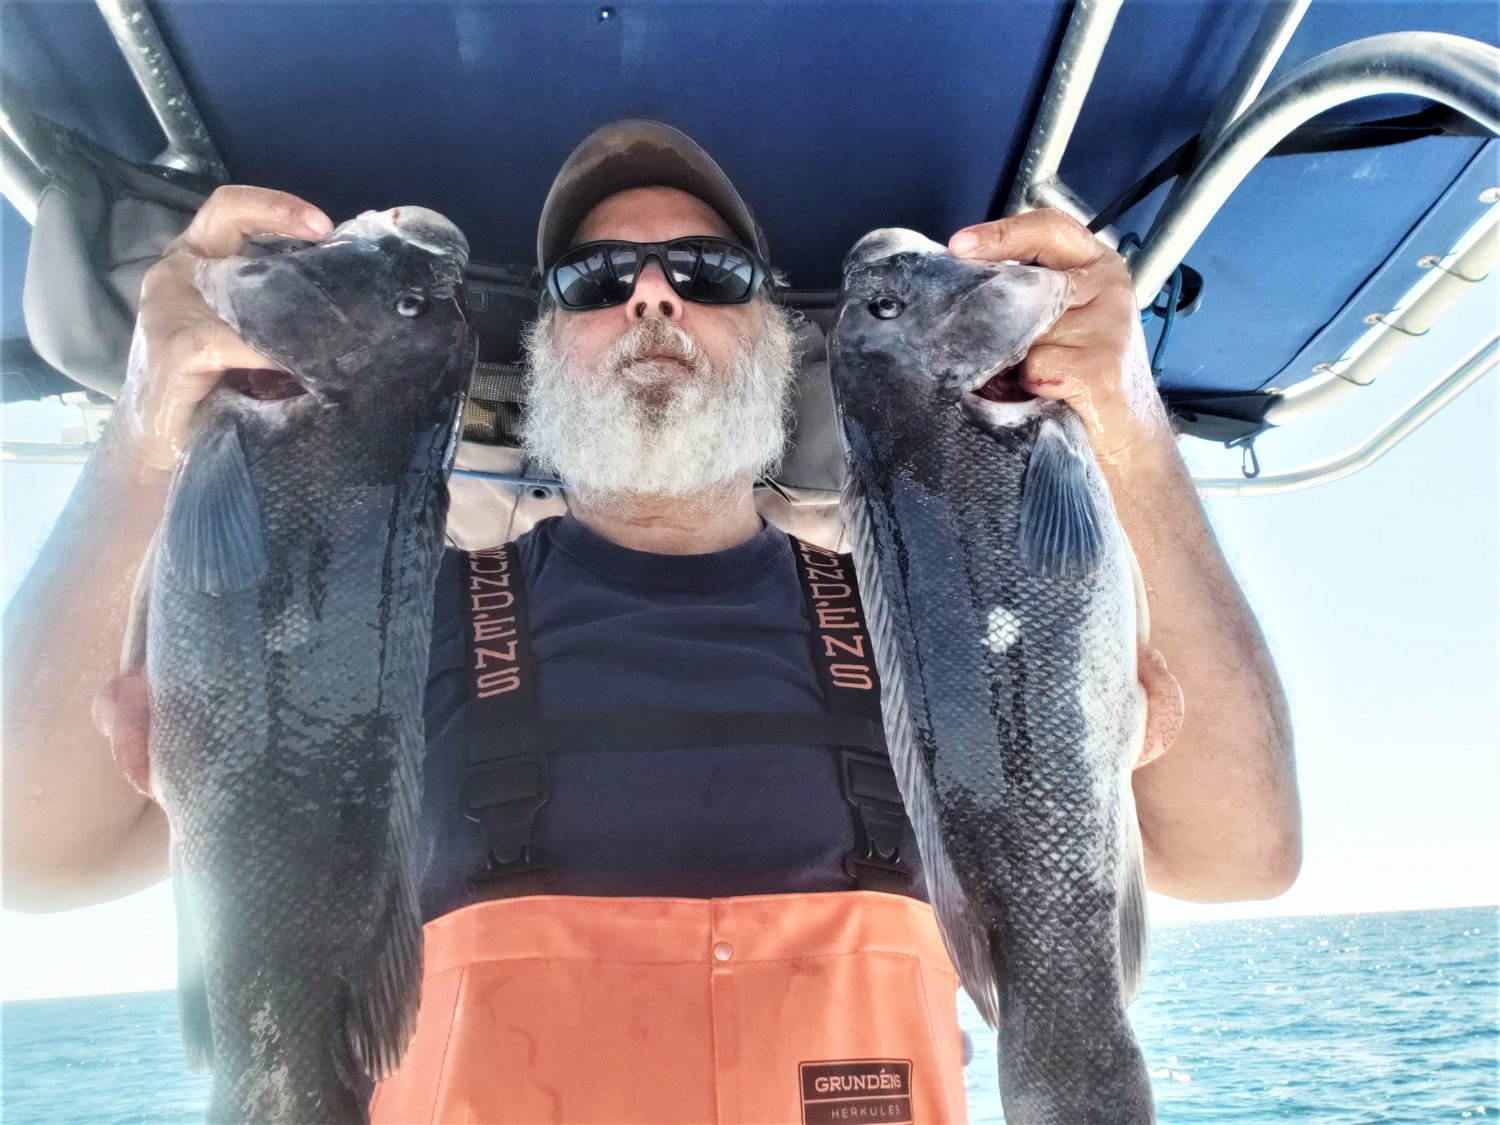 Tautog bite improving: Paul Phillips of North Kingstown with tautog he caught earlier this year. He fished Monday off Newport and caught 42 tautog several were keepers 16” to 20”.